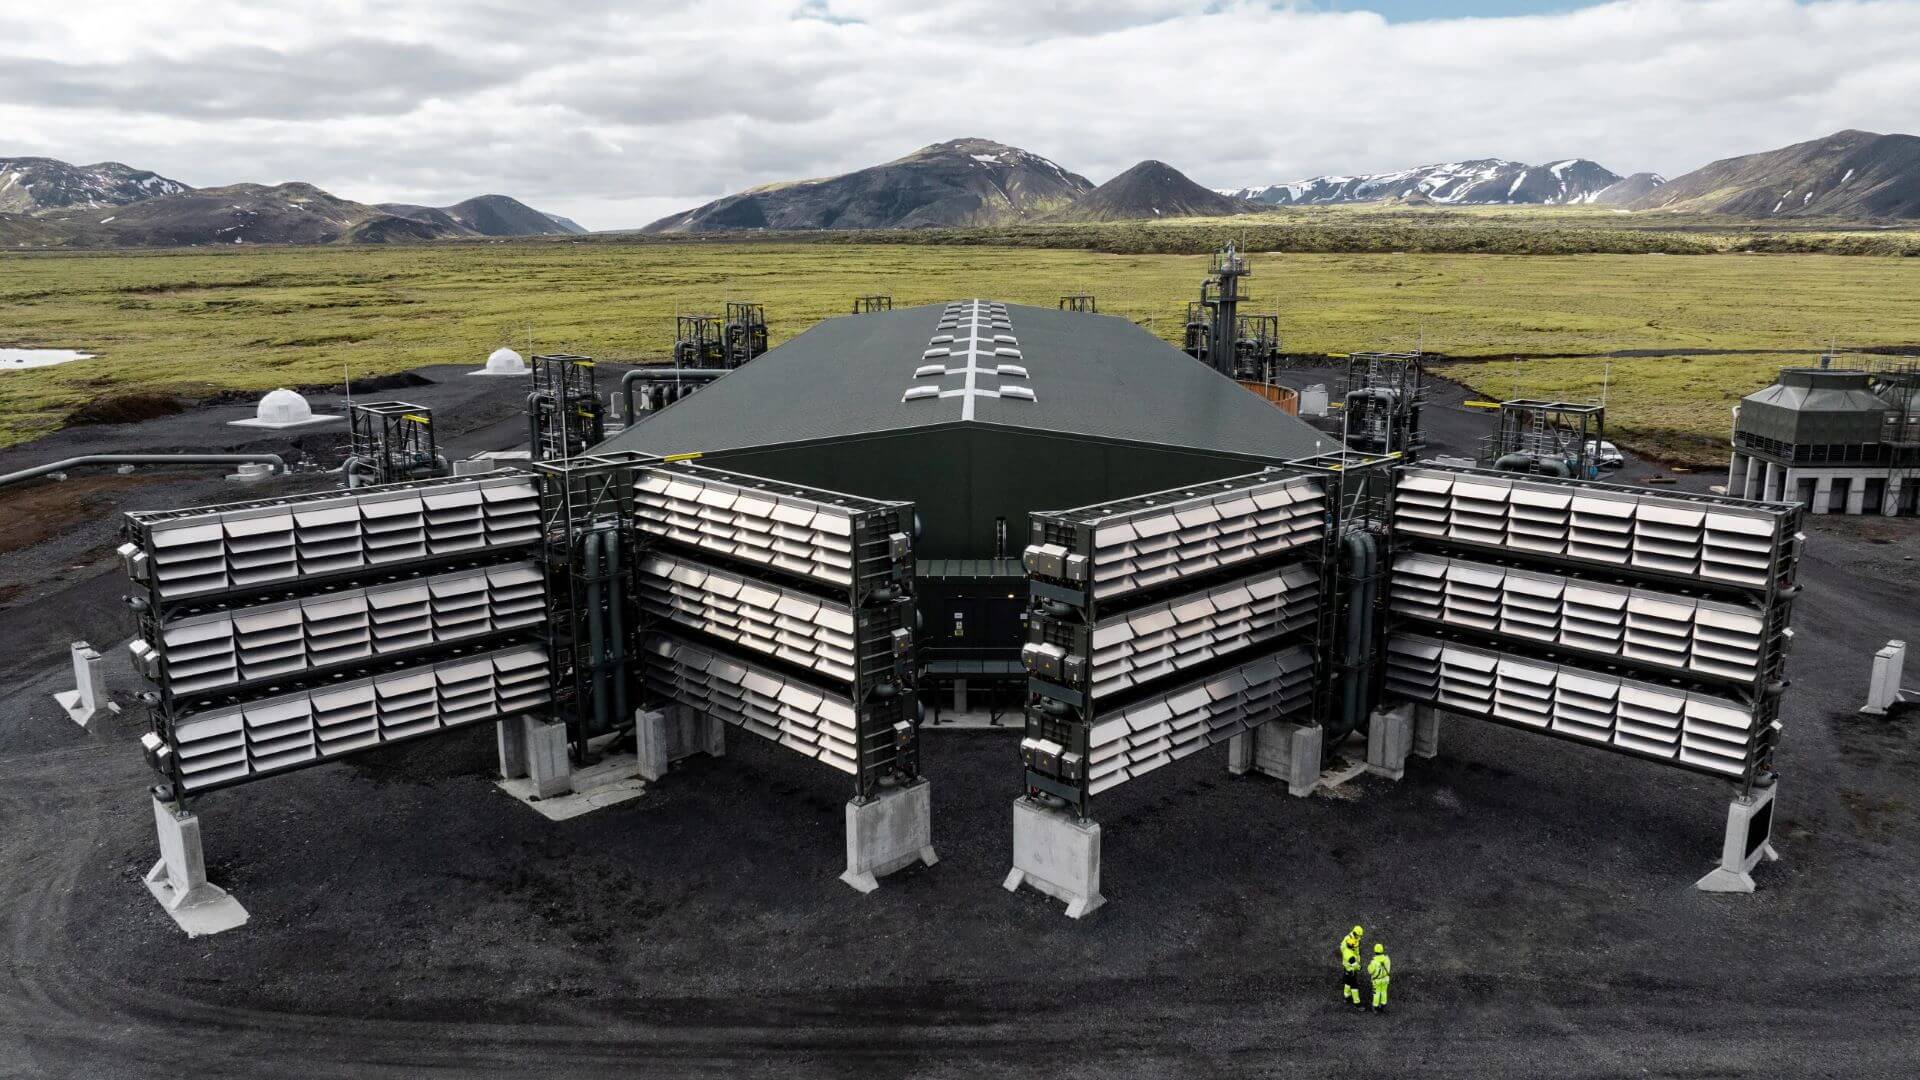 Exterior view of the Mammoth direct air capture and storage plant in Iceland